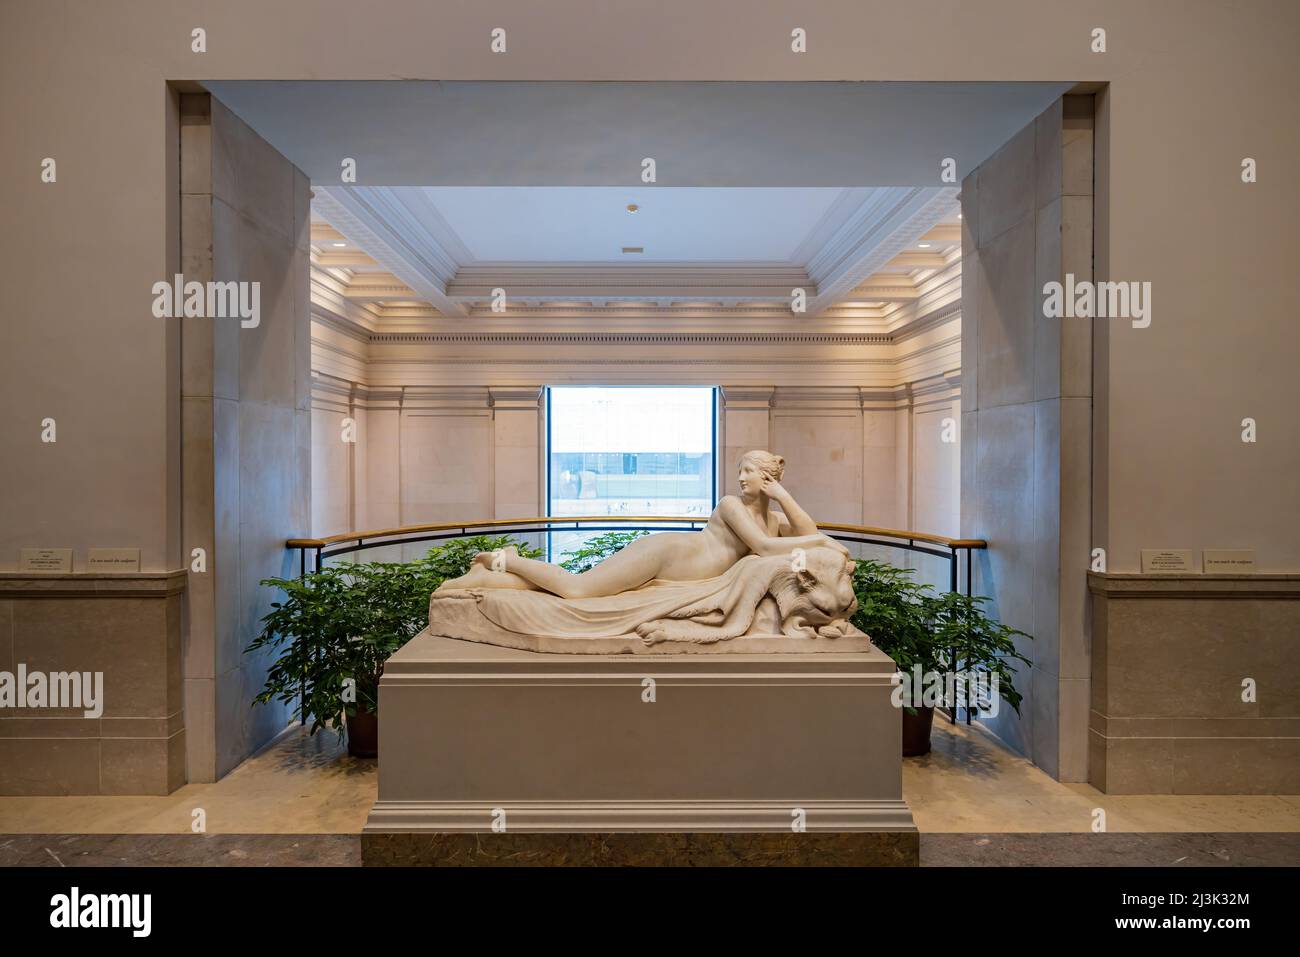 Washington DC, MAR 31 2022 - Interior view of the National Gallery of Art Stock Photo